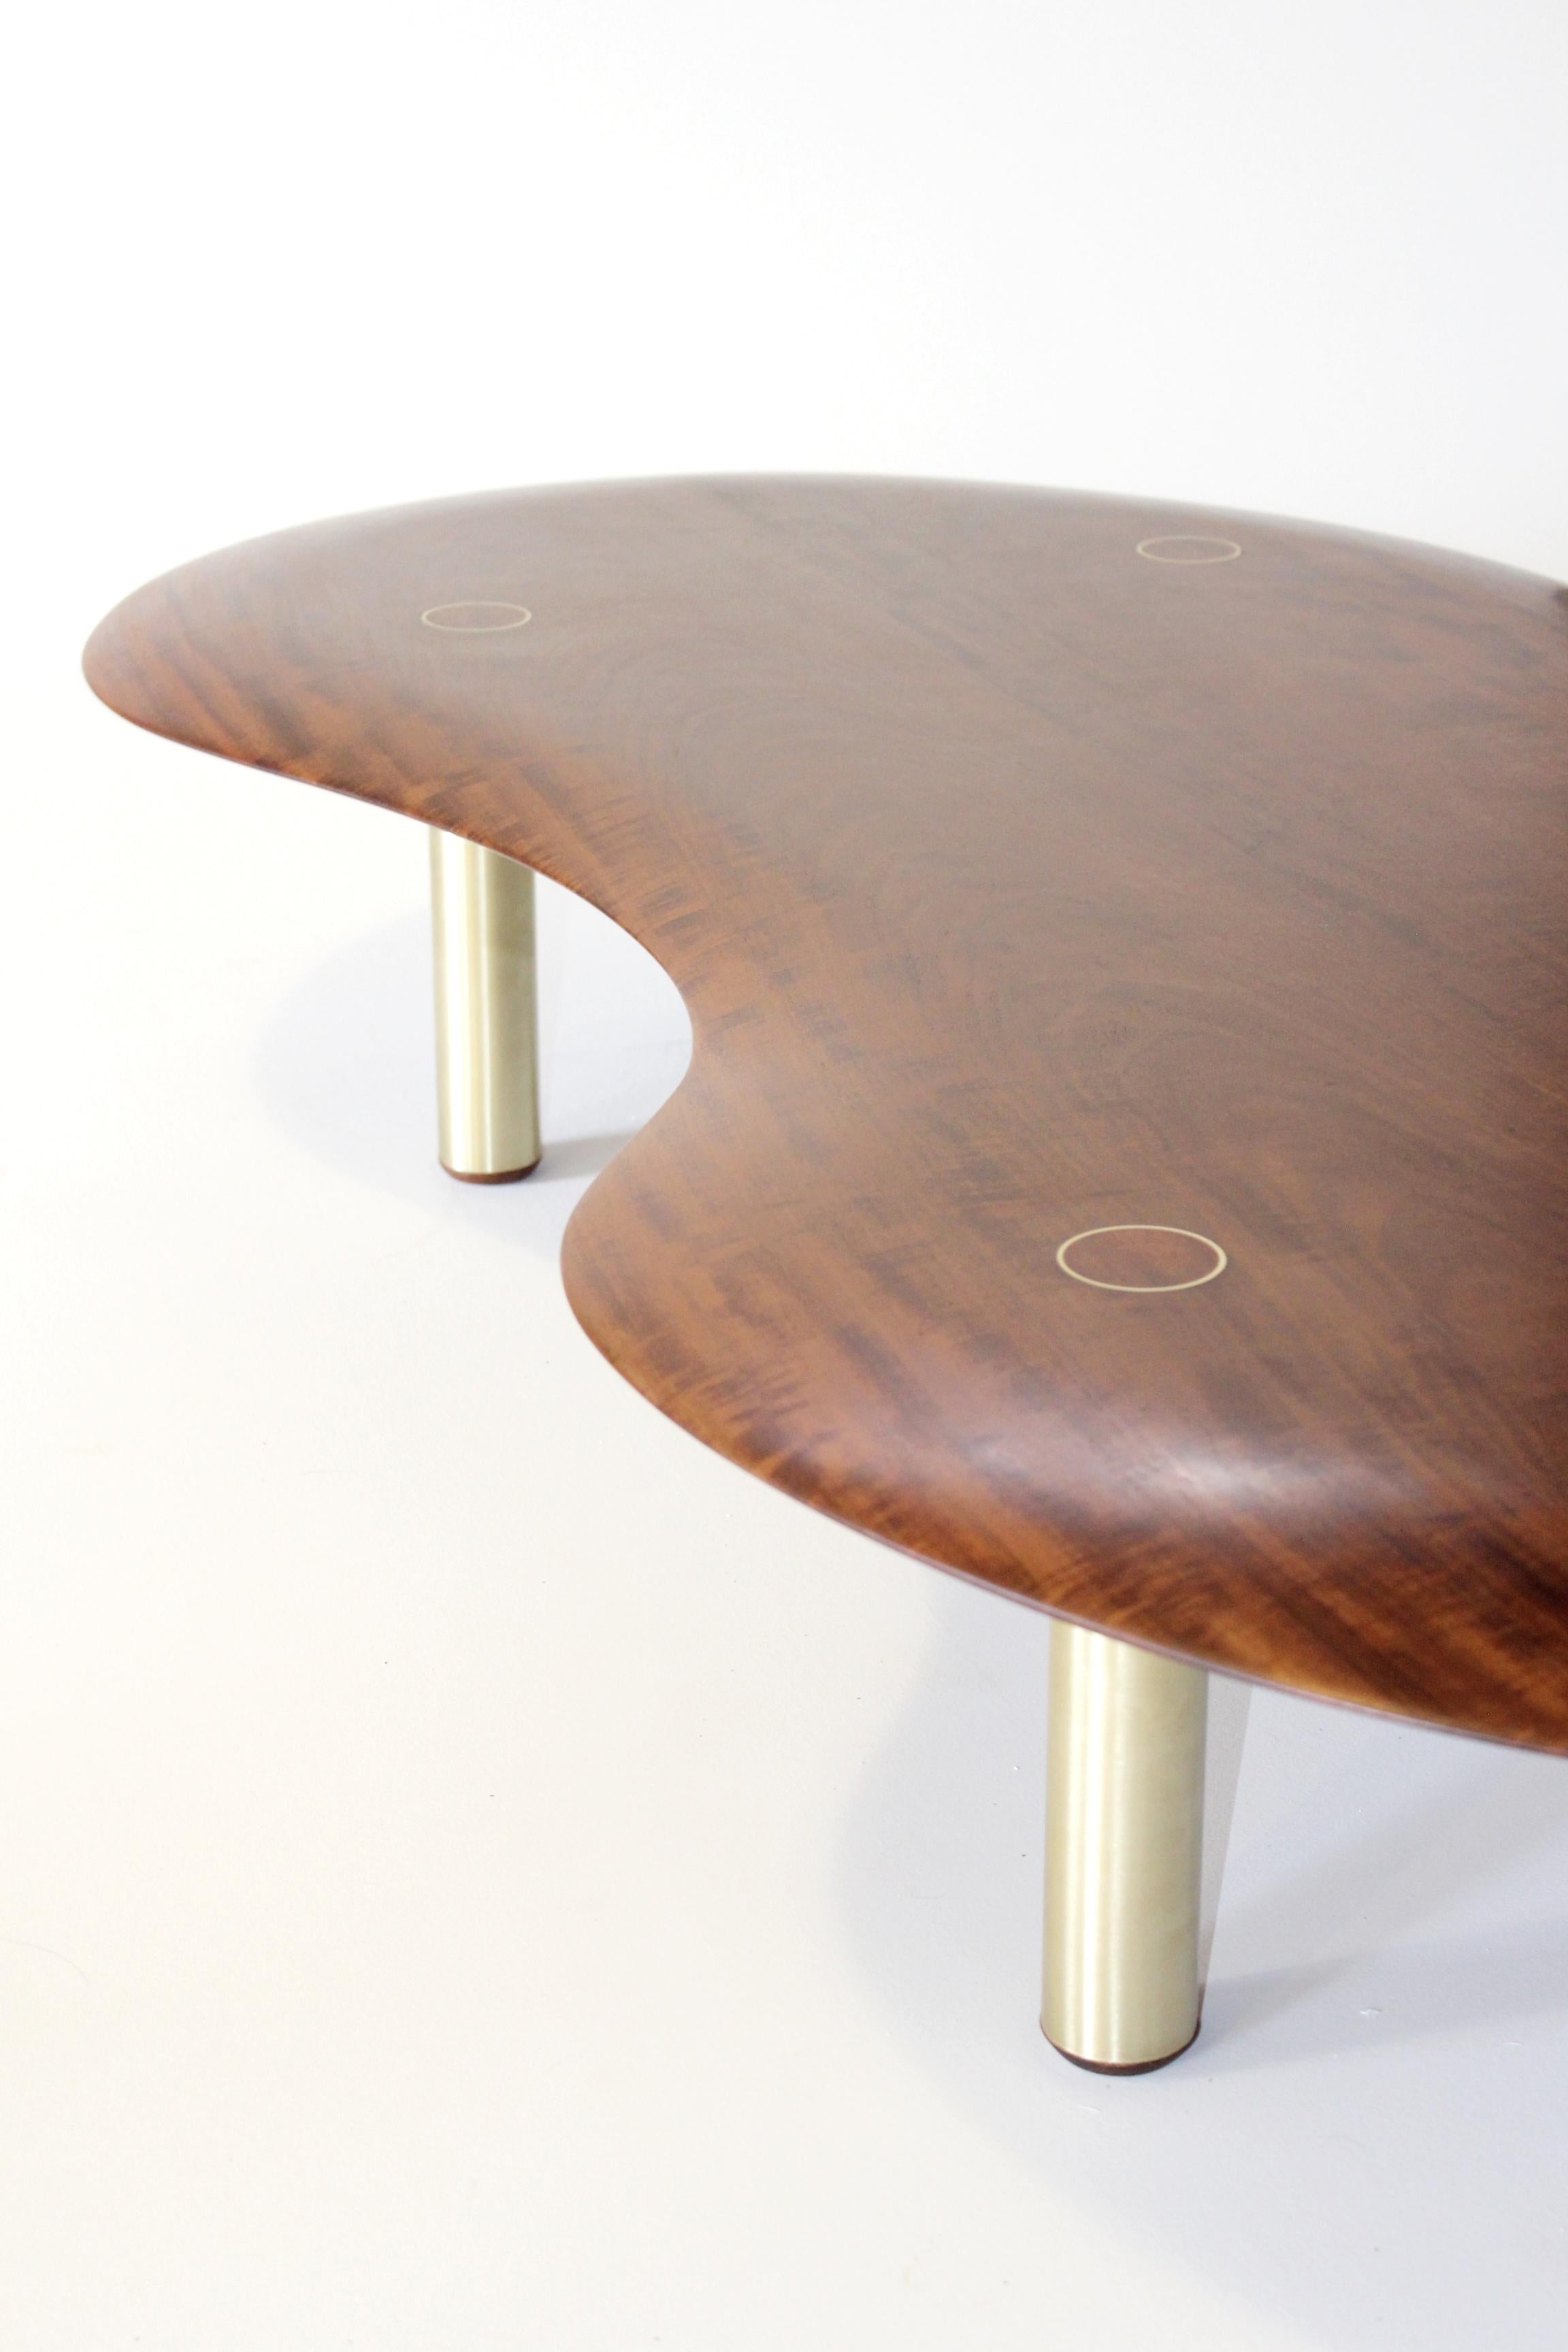 Seed coffee table by Gustavo Dias
Seed coffee table
Measures: 1.60 m x W 0.90 m x H 0.25m
Leg diameter 5 cm
Top thickness 3.2 cm

Gustavo Dias
One of the most important contemporary Brazilian designer.
Born in 1978 and raised in a small city